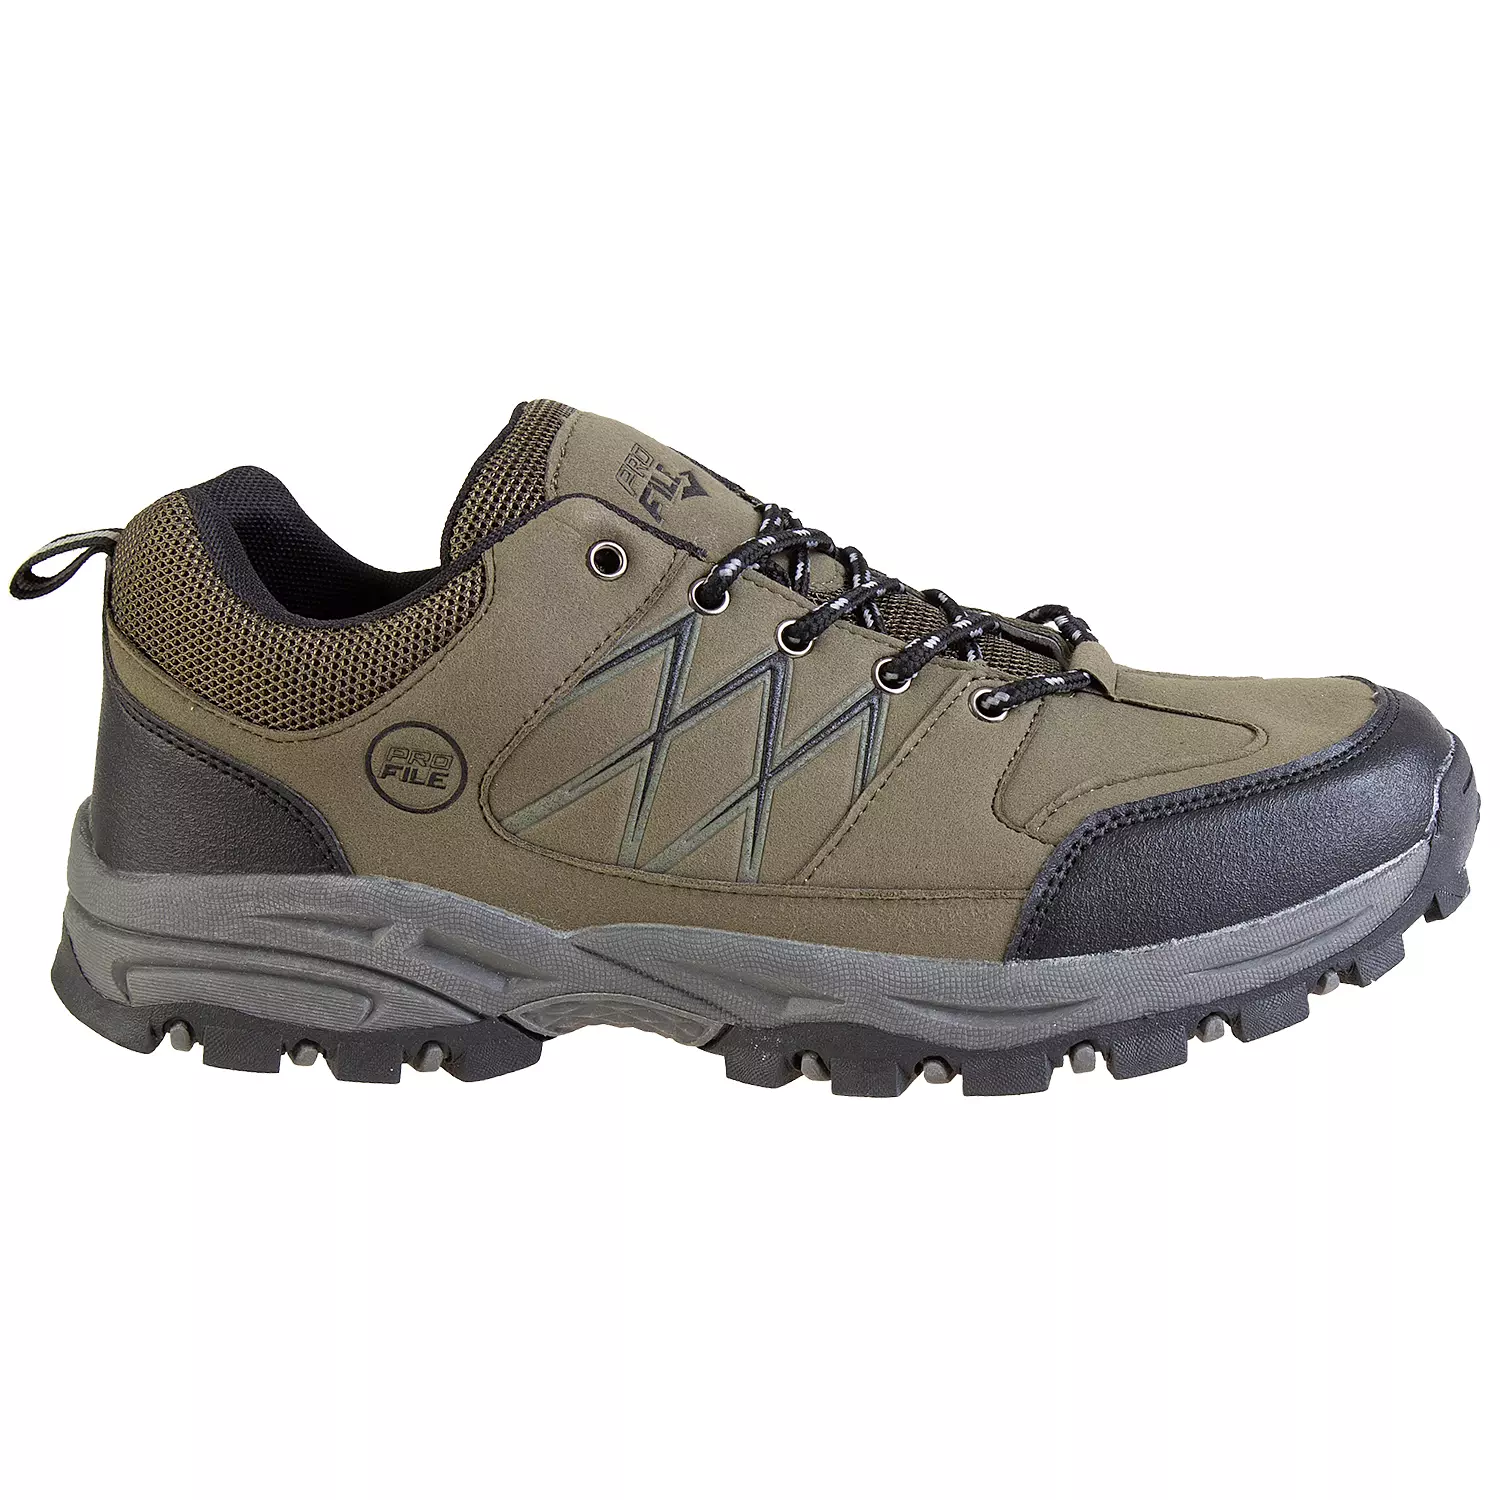 Men's low top hiking shoes with reflective strips, khaki, size 9